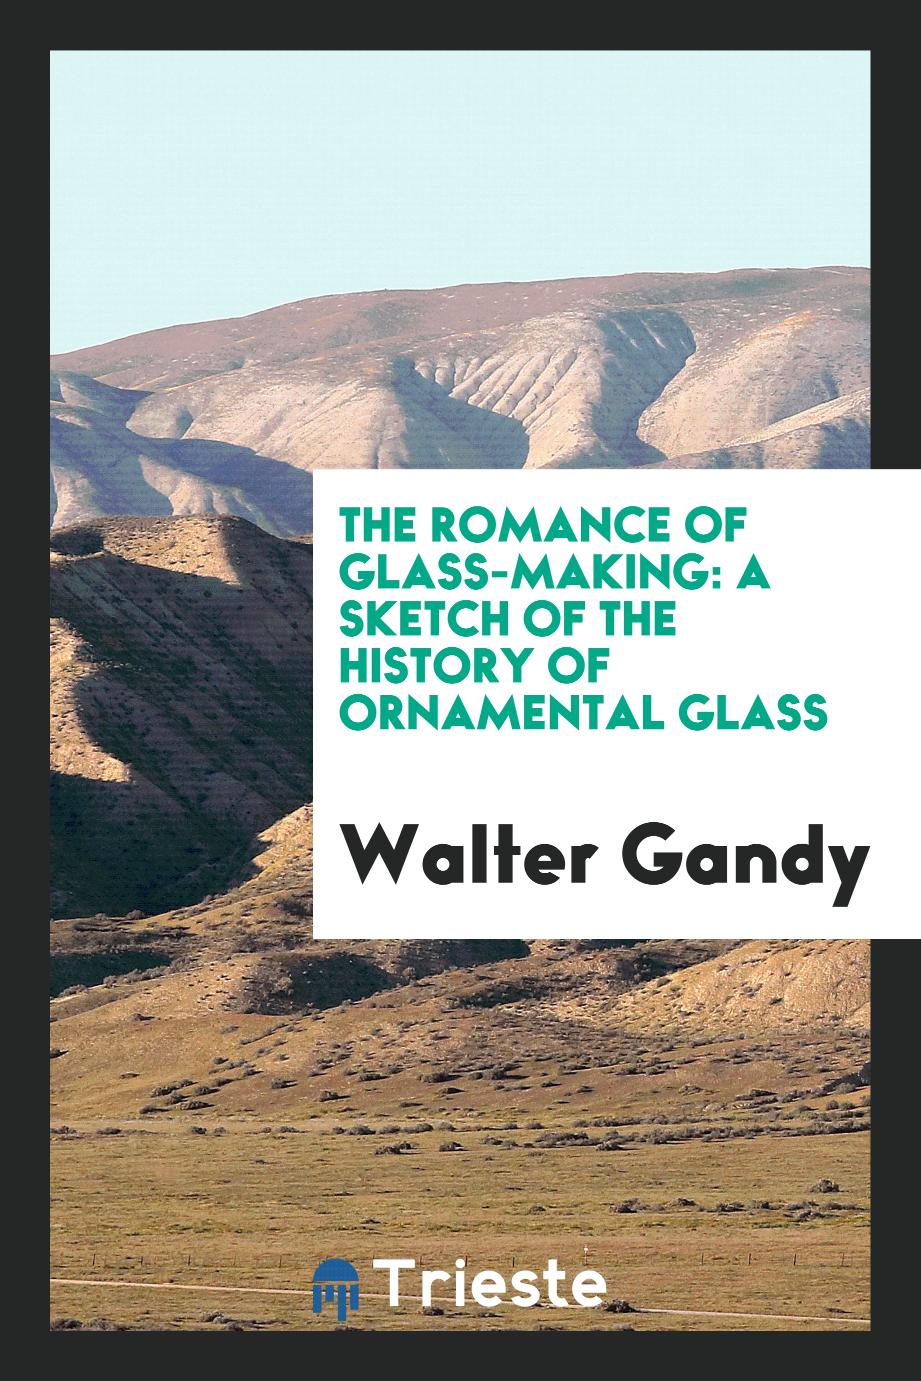 The Romance of Glass-Making: A Sketch of the History of Ornamental Glass